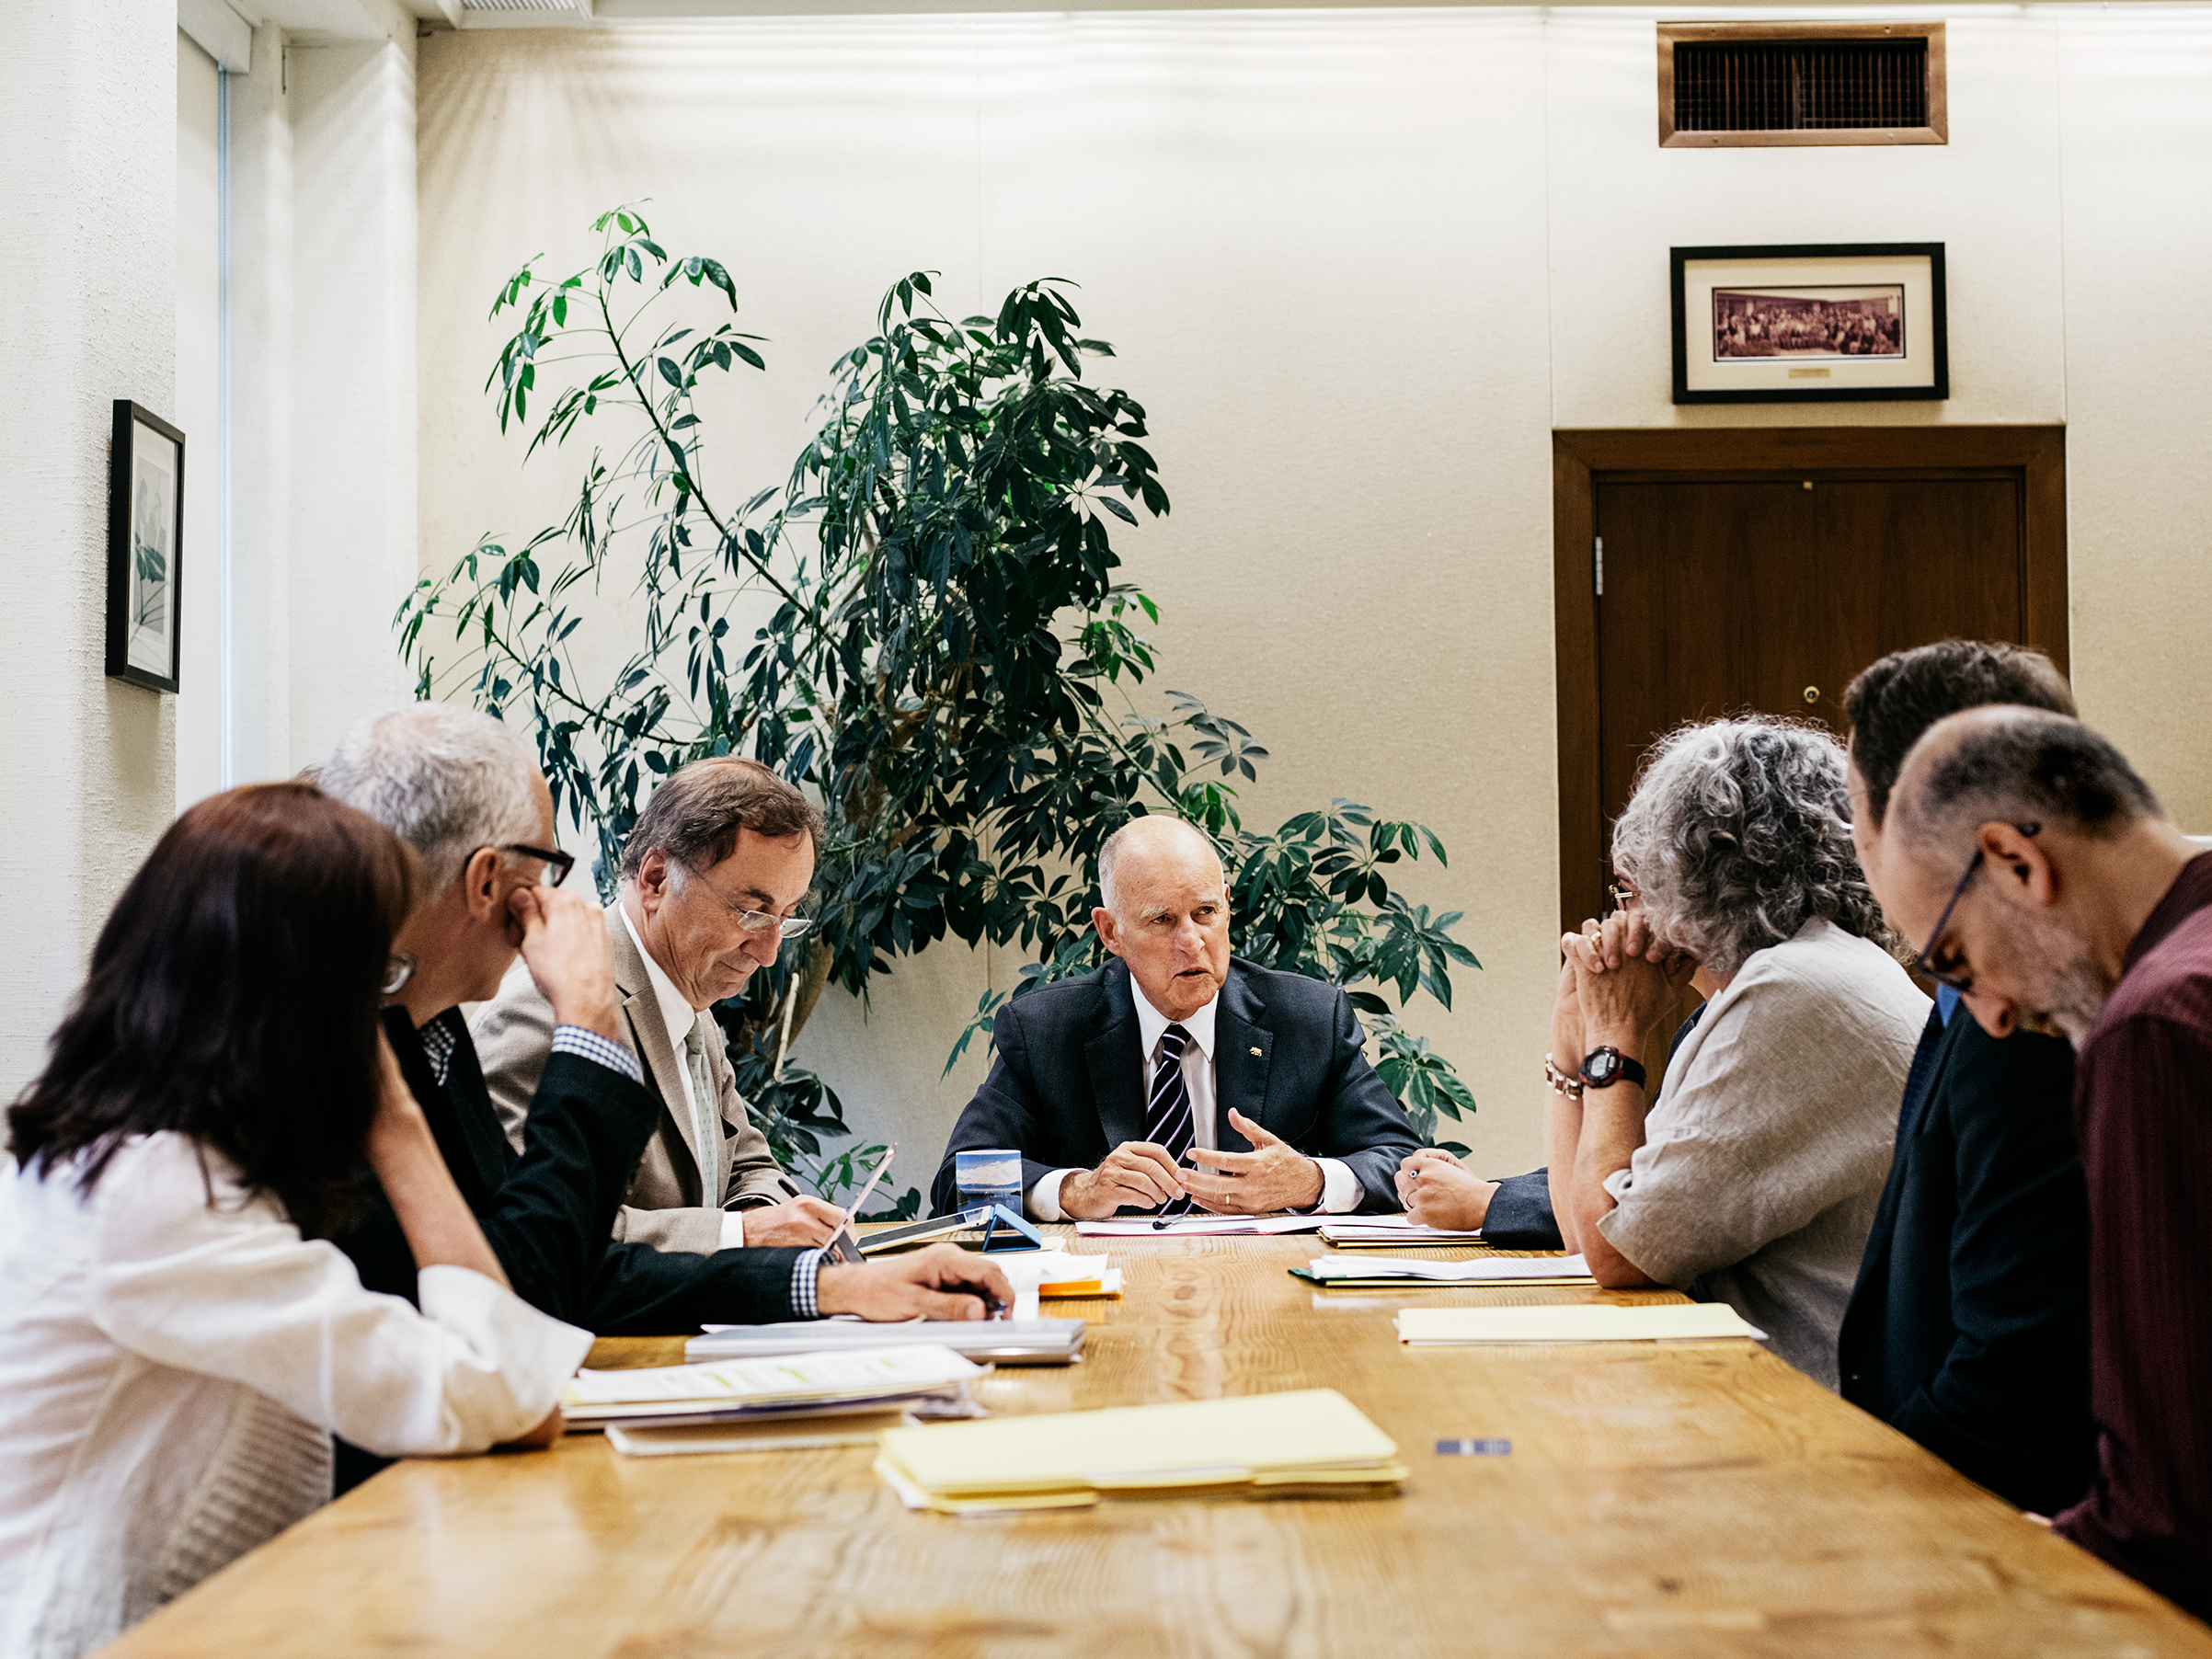 Brown hosts a meeting with environmental experts at his office in Sacramento (Benjamin Rasmussen for TIME)